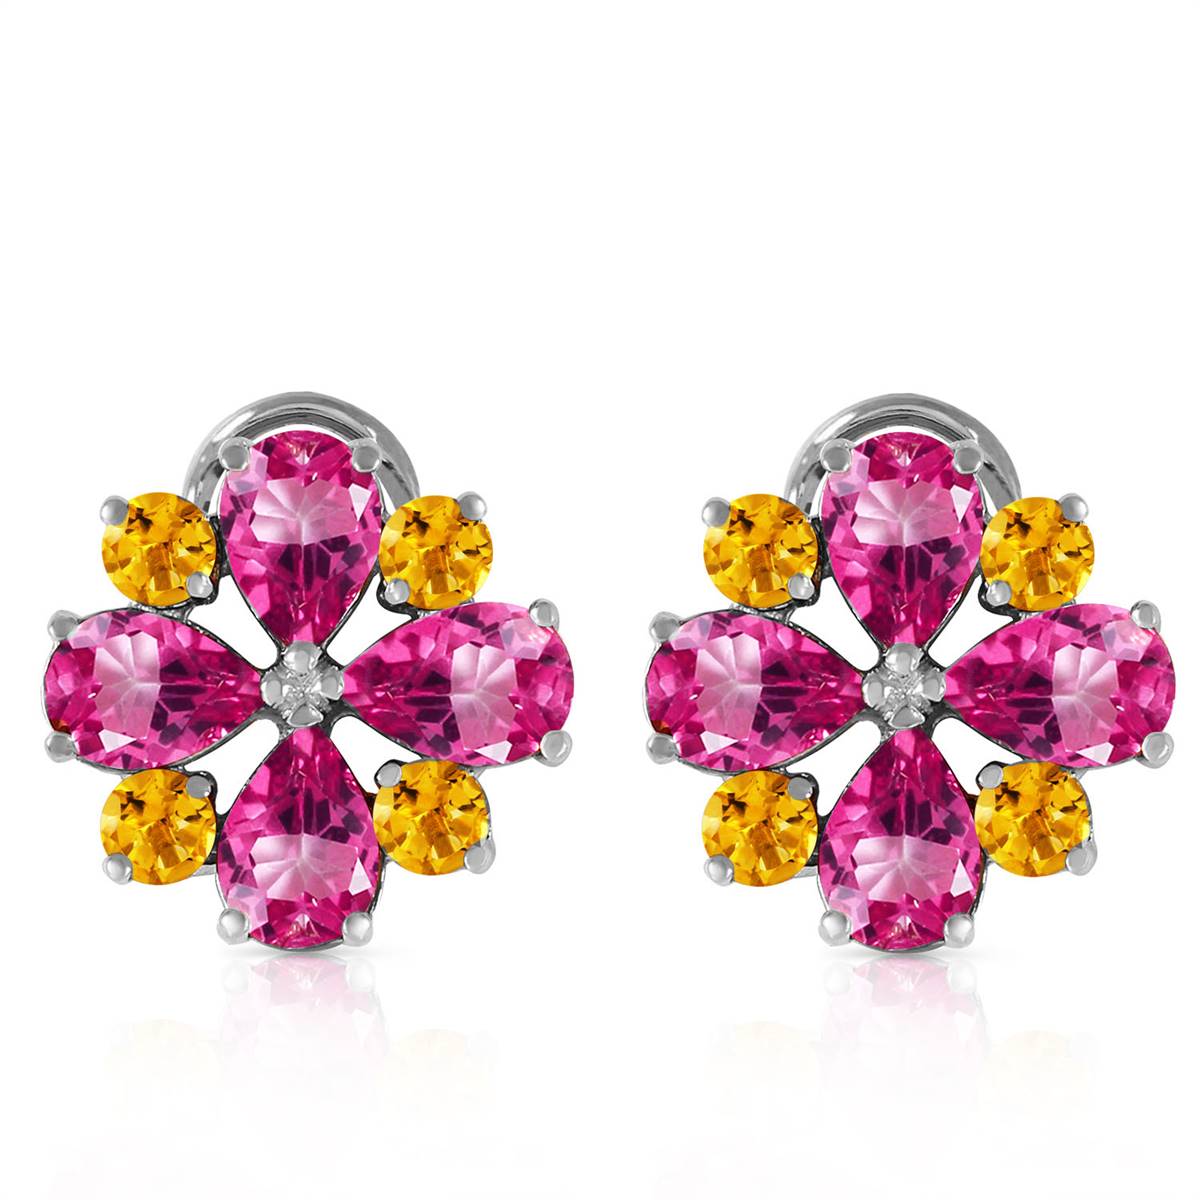 4.85 Carat 14K Solid White Gold French Clips Earrings Pink Topaz Citrine